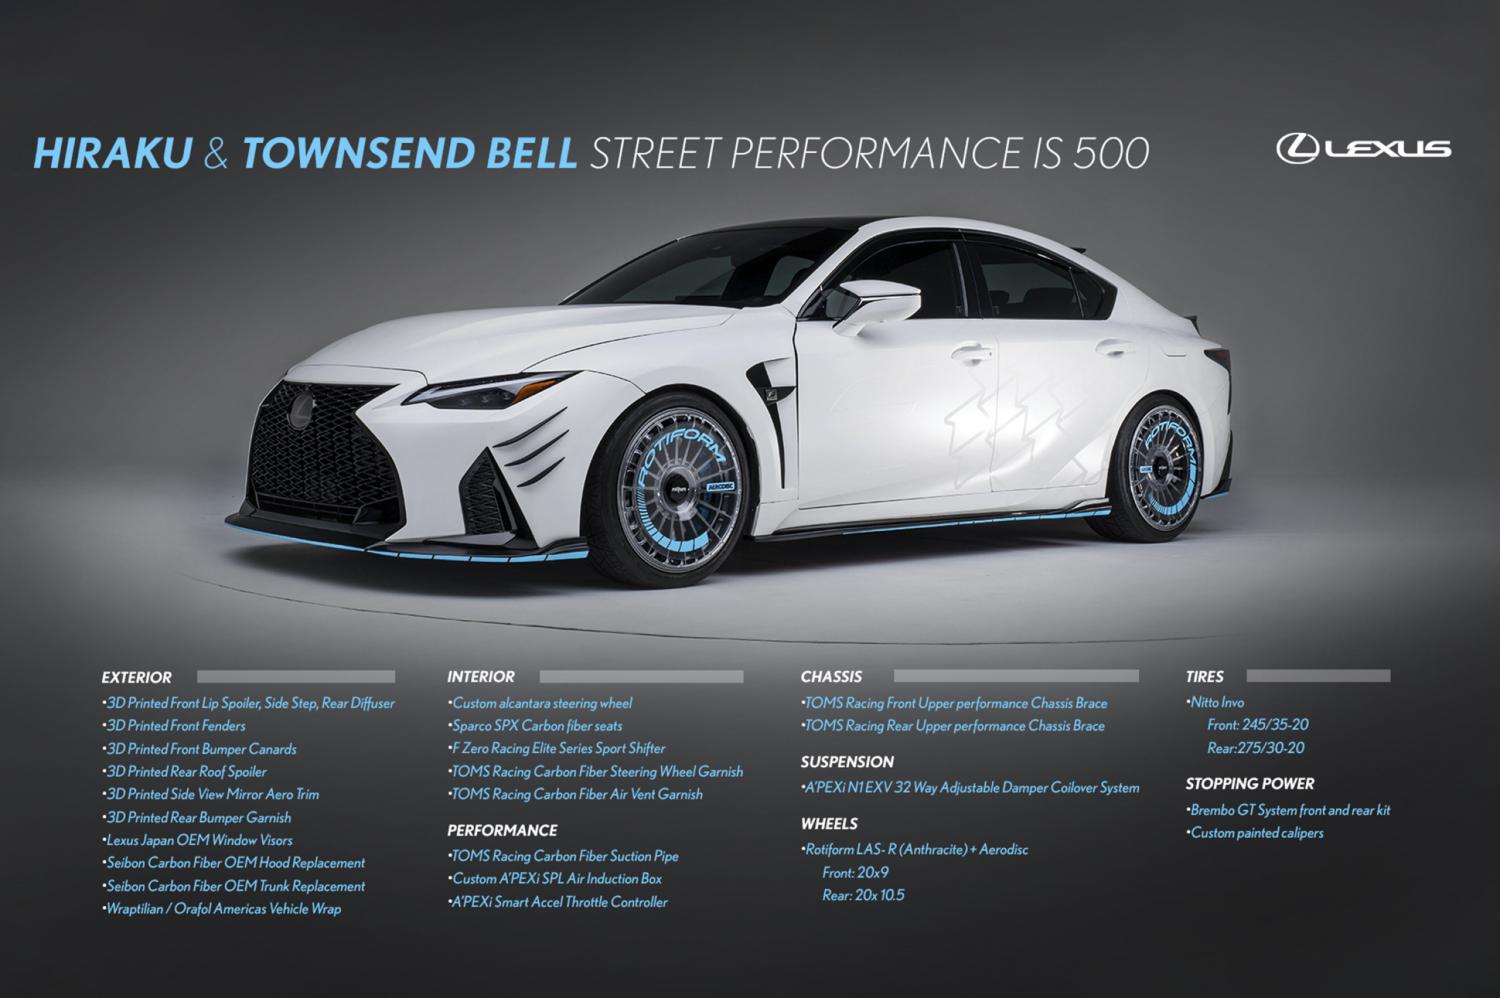 Hiraku & Townsend Bell Street Performance IS 500 Equipped with Seibon Carbon